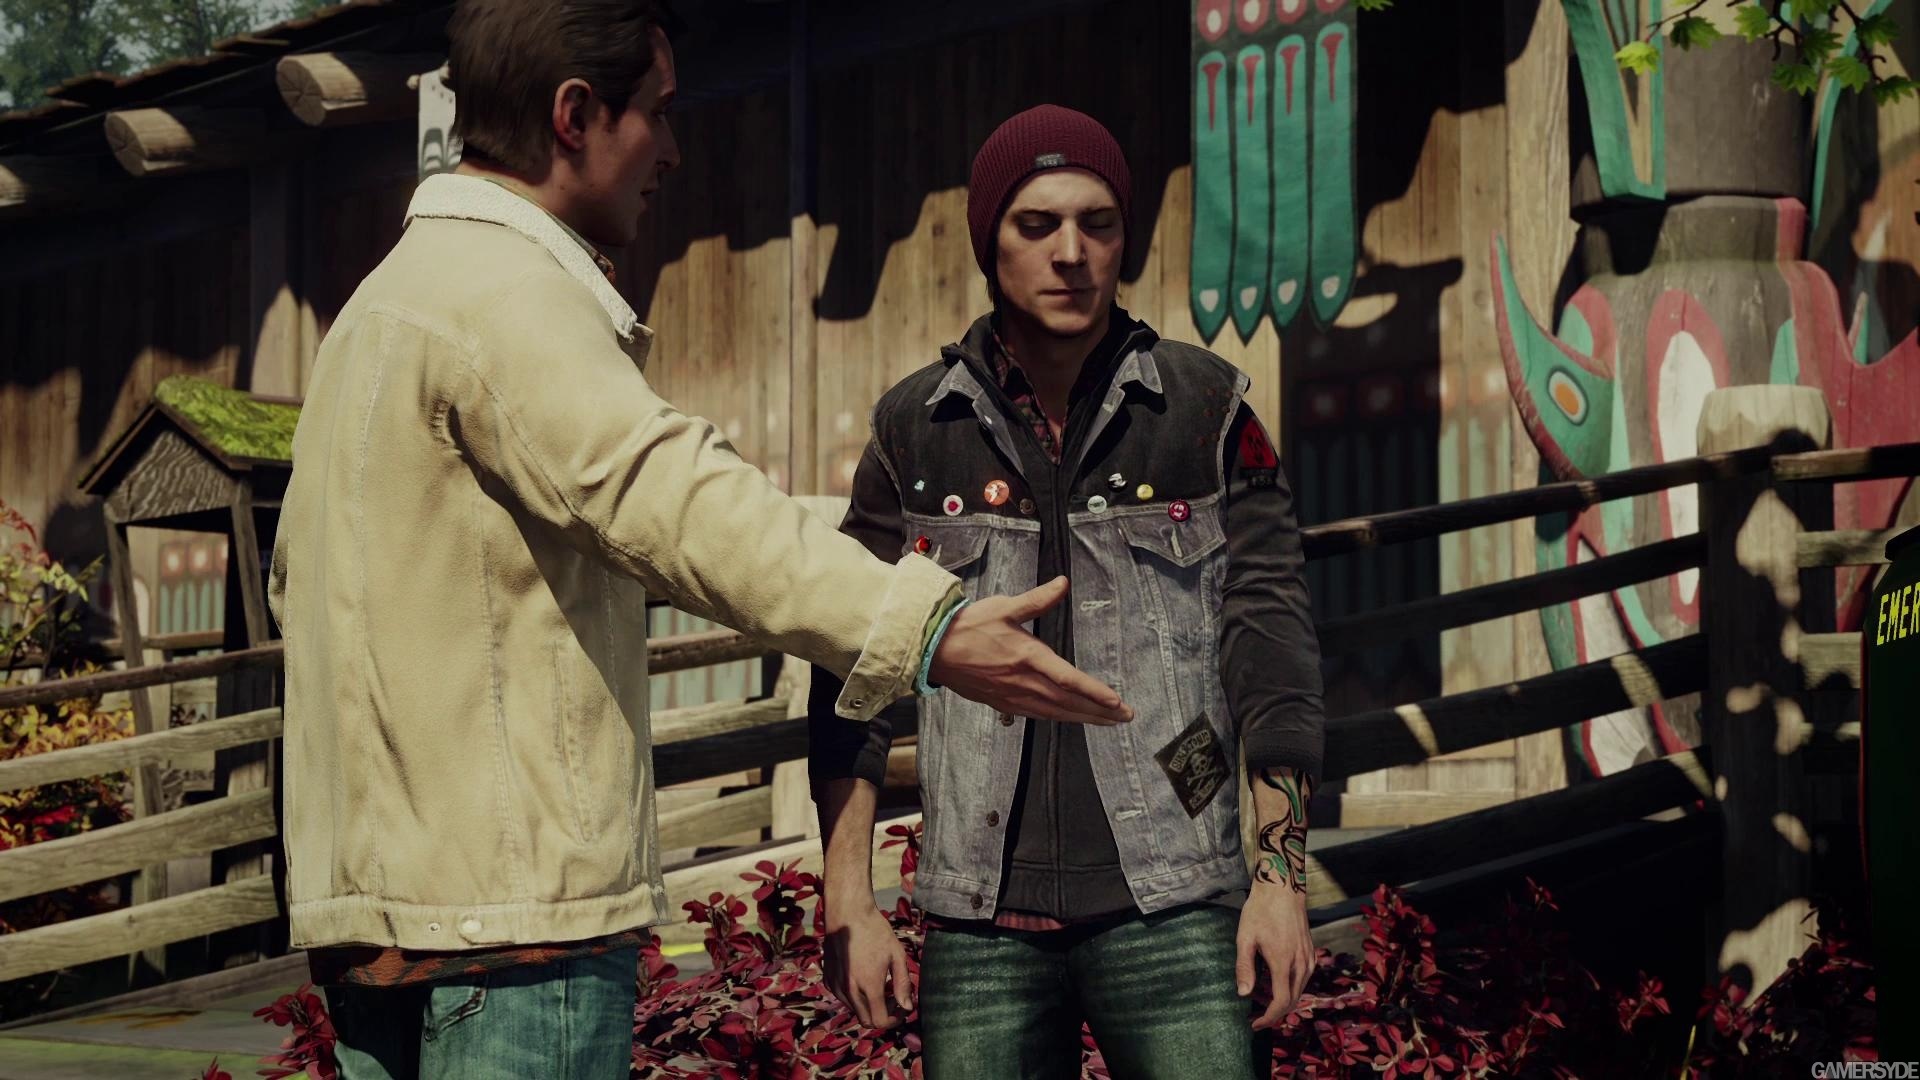 image_infamous_second_son-22310-2661_0004.jpg